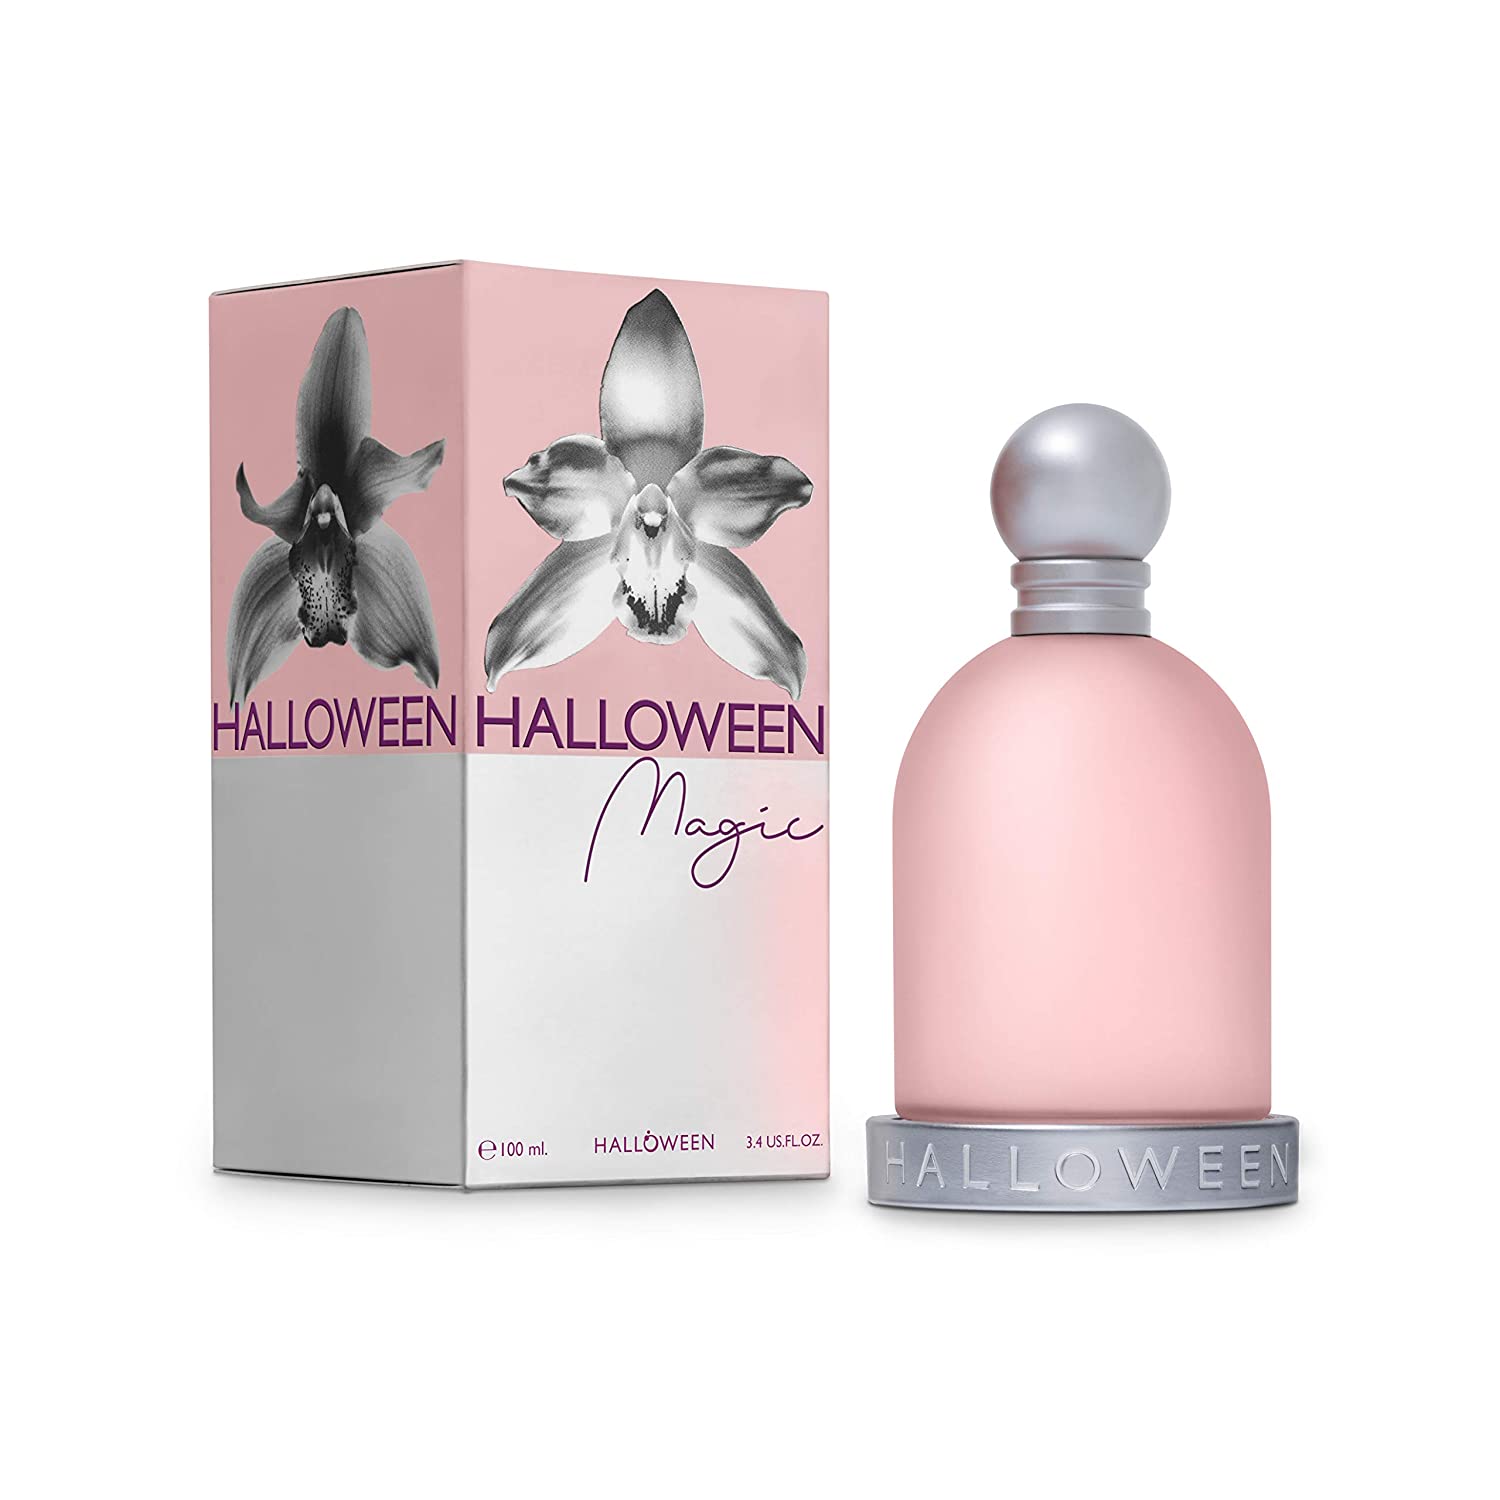 Halloween Magic is a fascinating and entrancing fragrance that was launched in 2018 by the design house of Halloween. The attractive fragrance for women consists of Raspberry, Pear ice cream and Yellow Mandarin at the top. The middle is a sensuous center that consists of notes from Freesia, Pink Peony and Jasmine Sambac. The base is a mix of Tonka Bean, Patchouli and Vanilla.